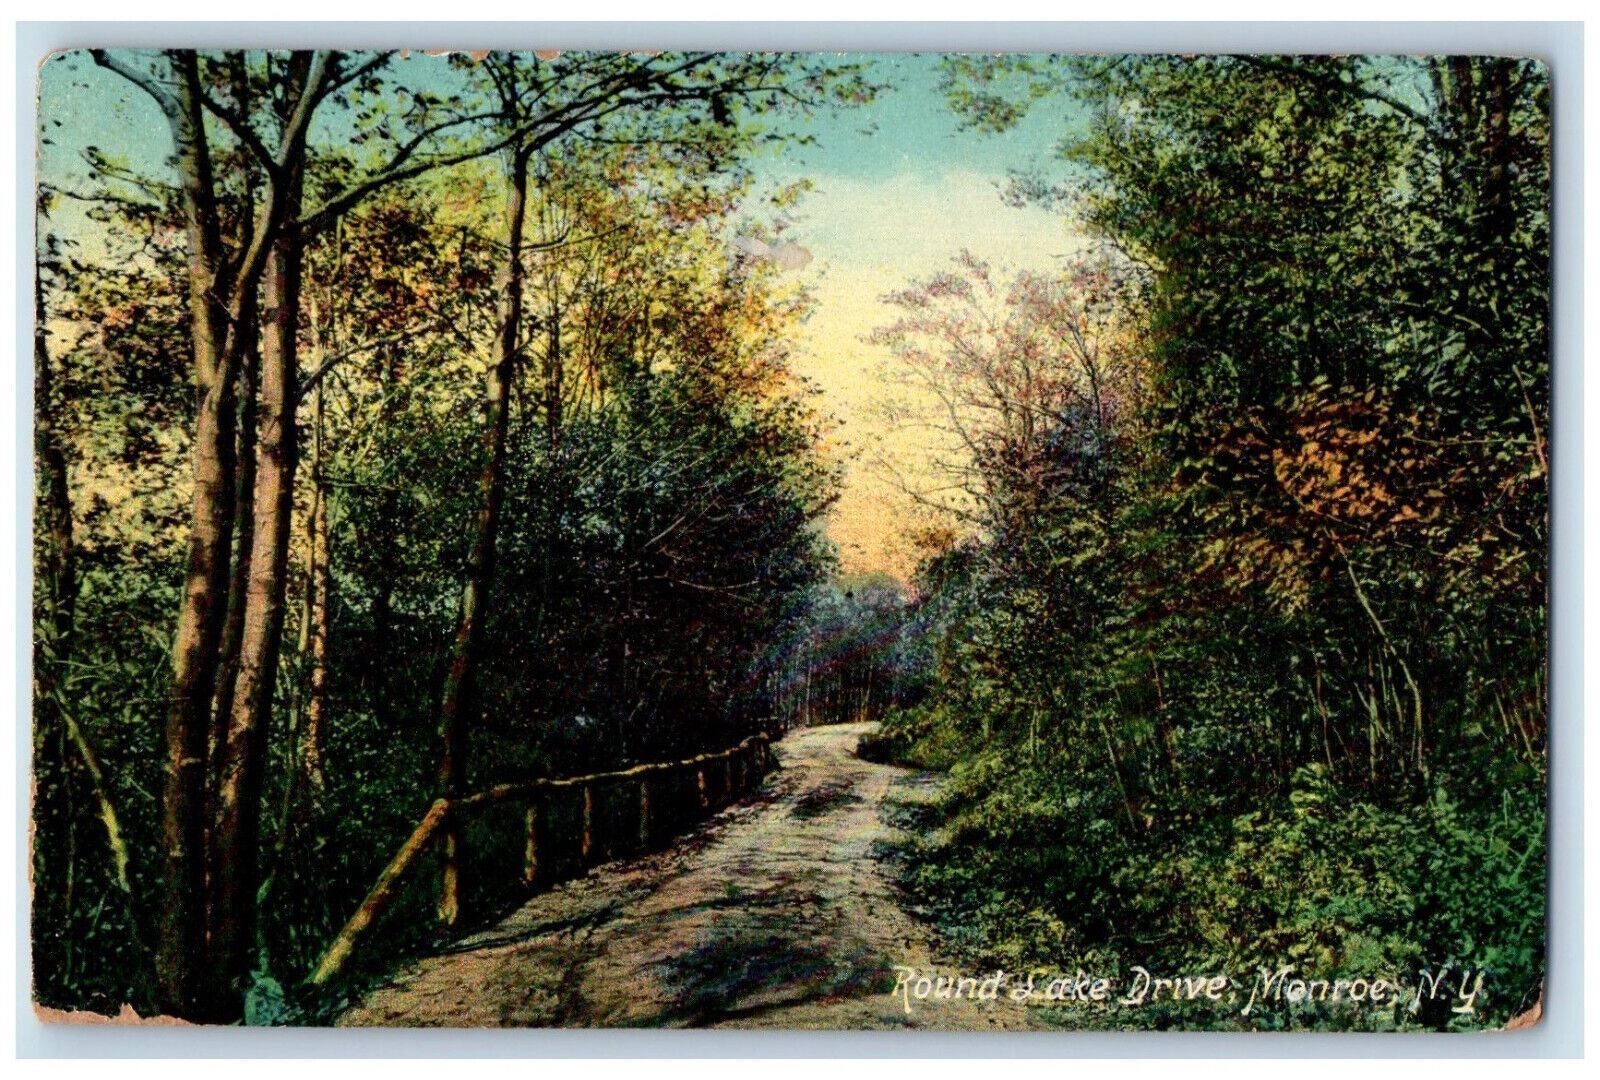 1911 Round Lake Drive Monroe NY Posted Antique Rogers Drugstore Postcard